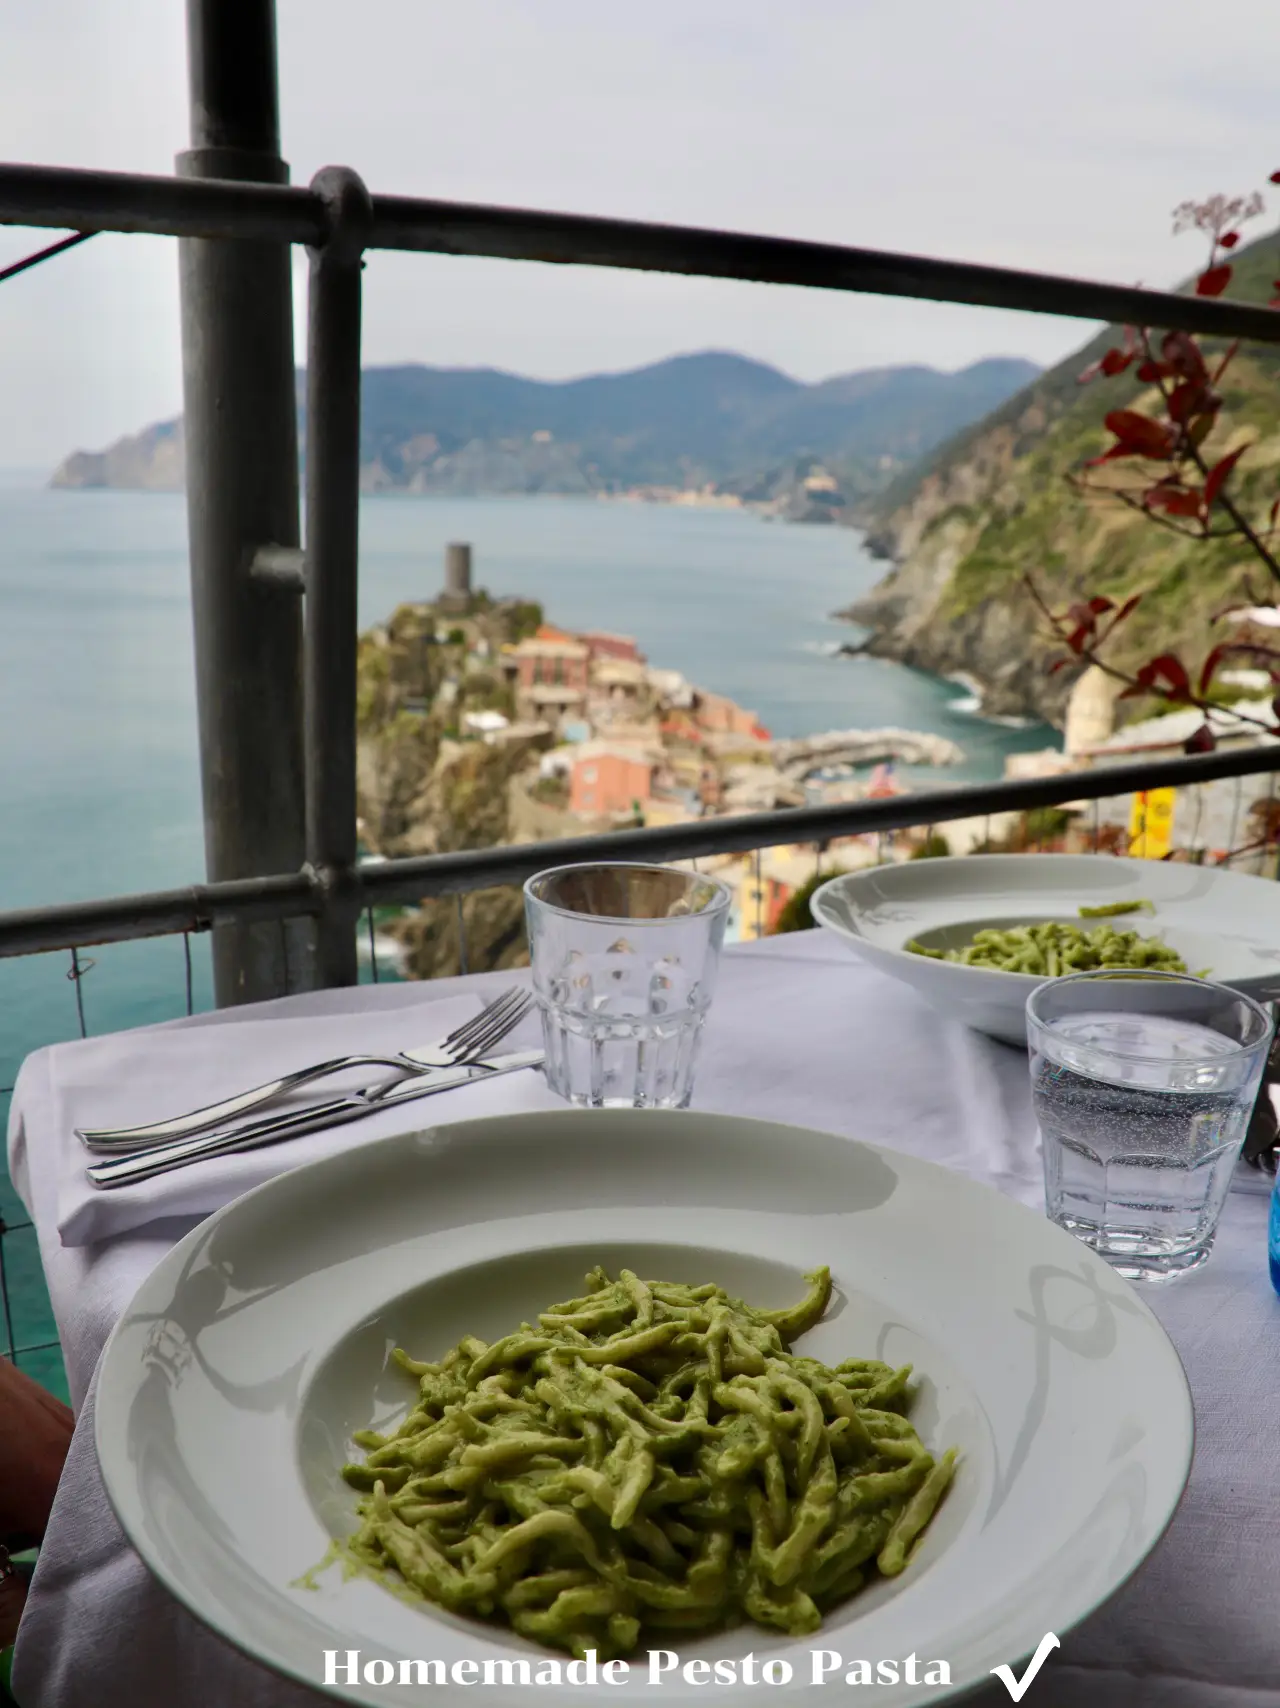  A plate of pasta with a sauce of pesto.